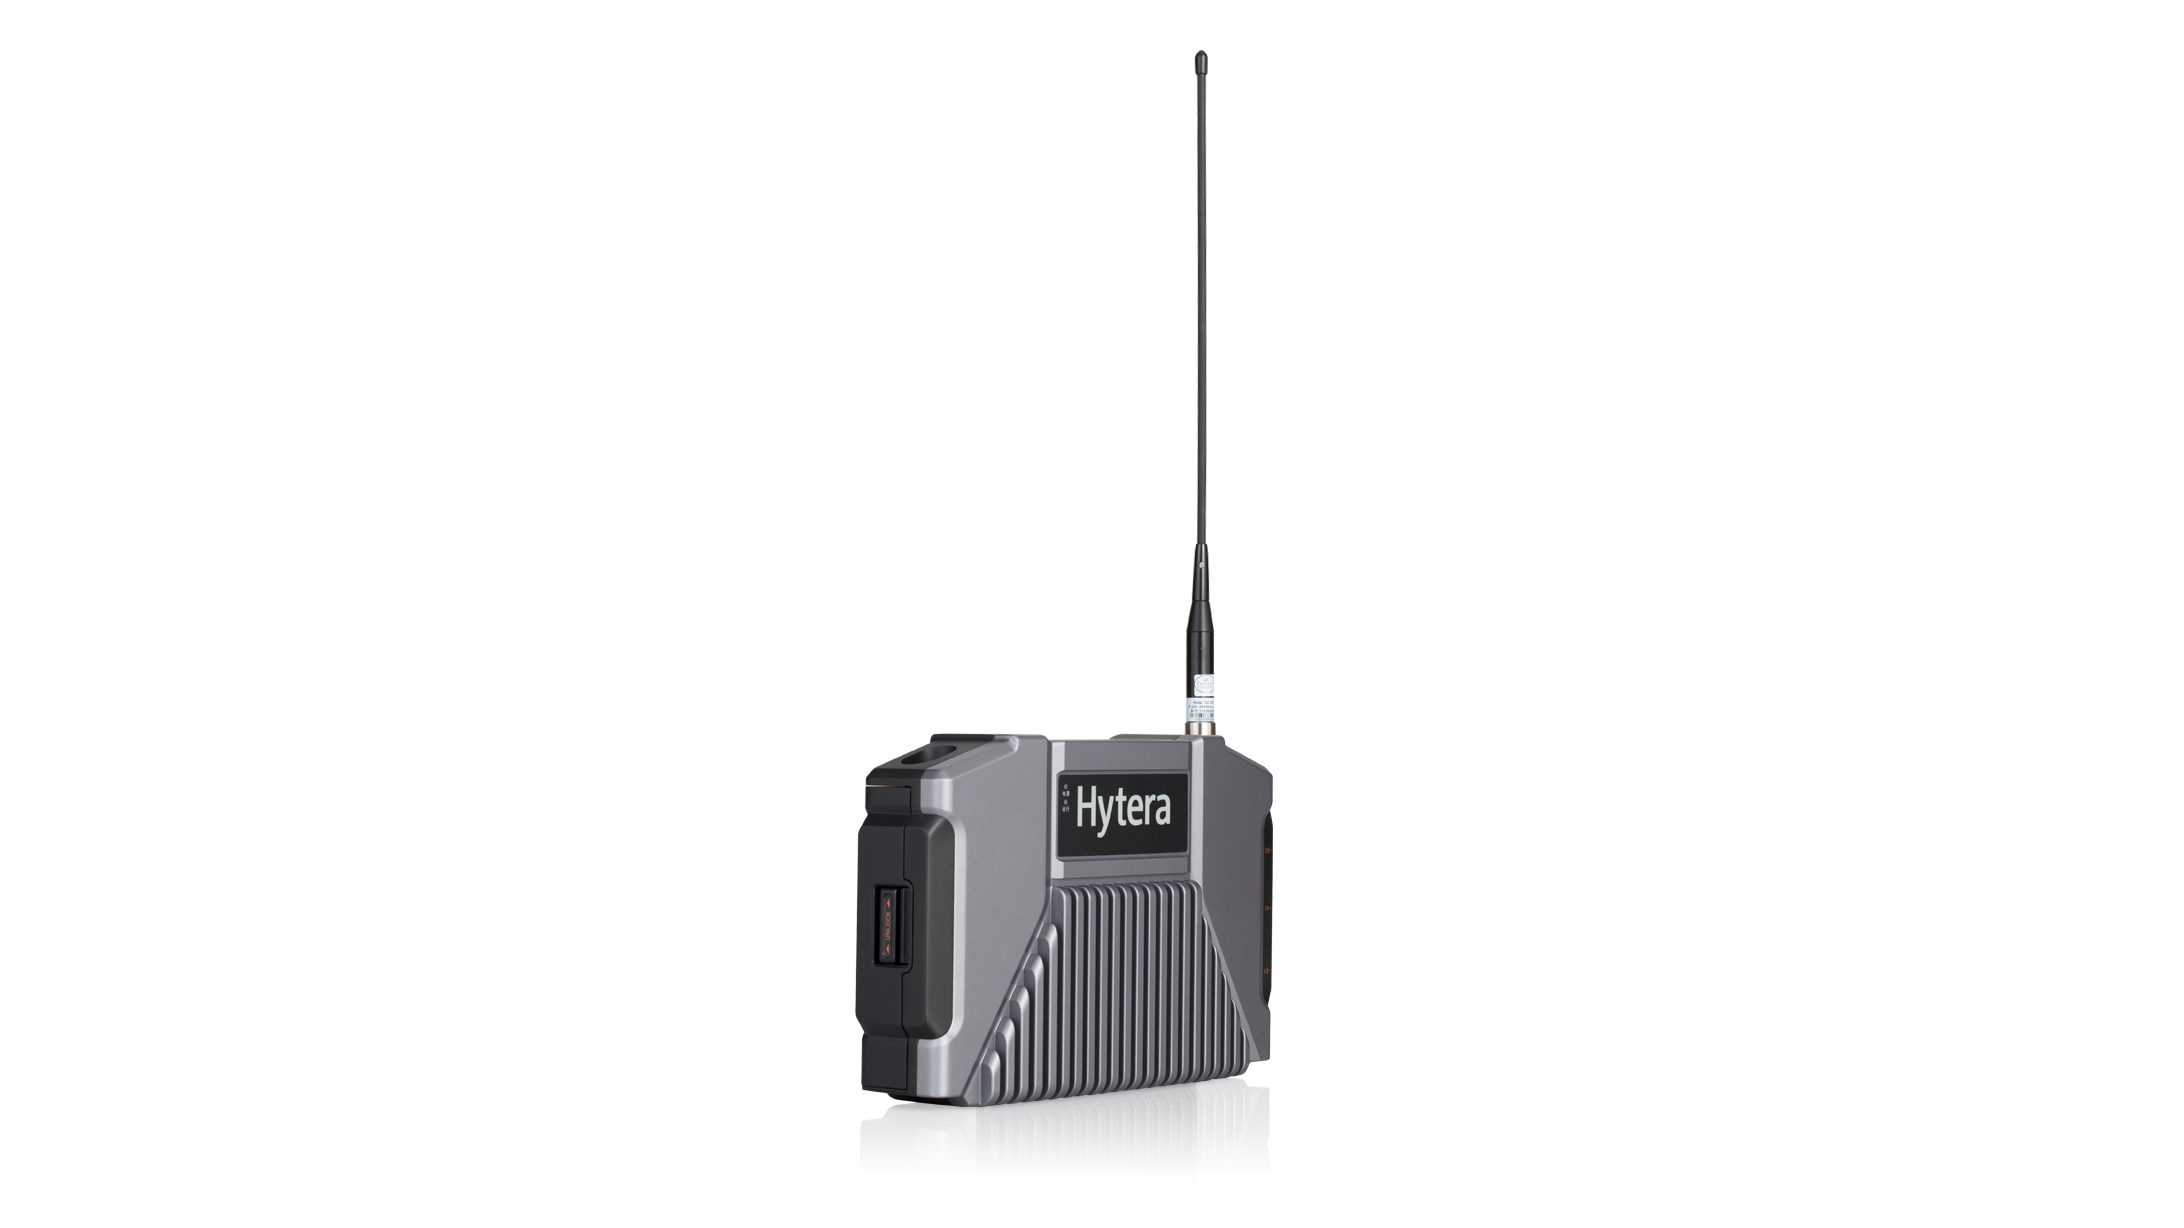 Hytera Critical Communications Solutions Are Essential for Disaster Relief and Recovery